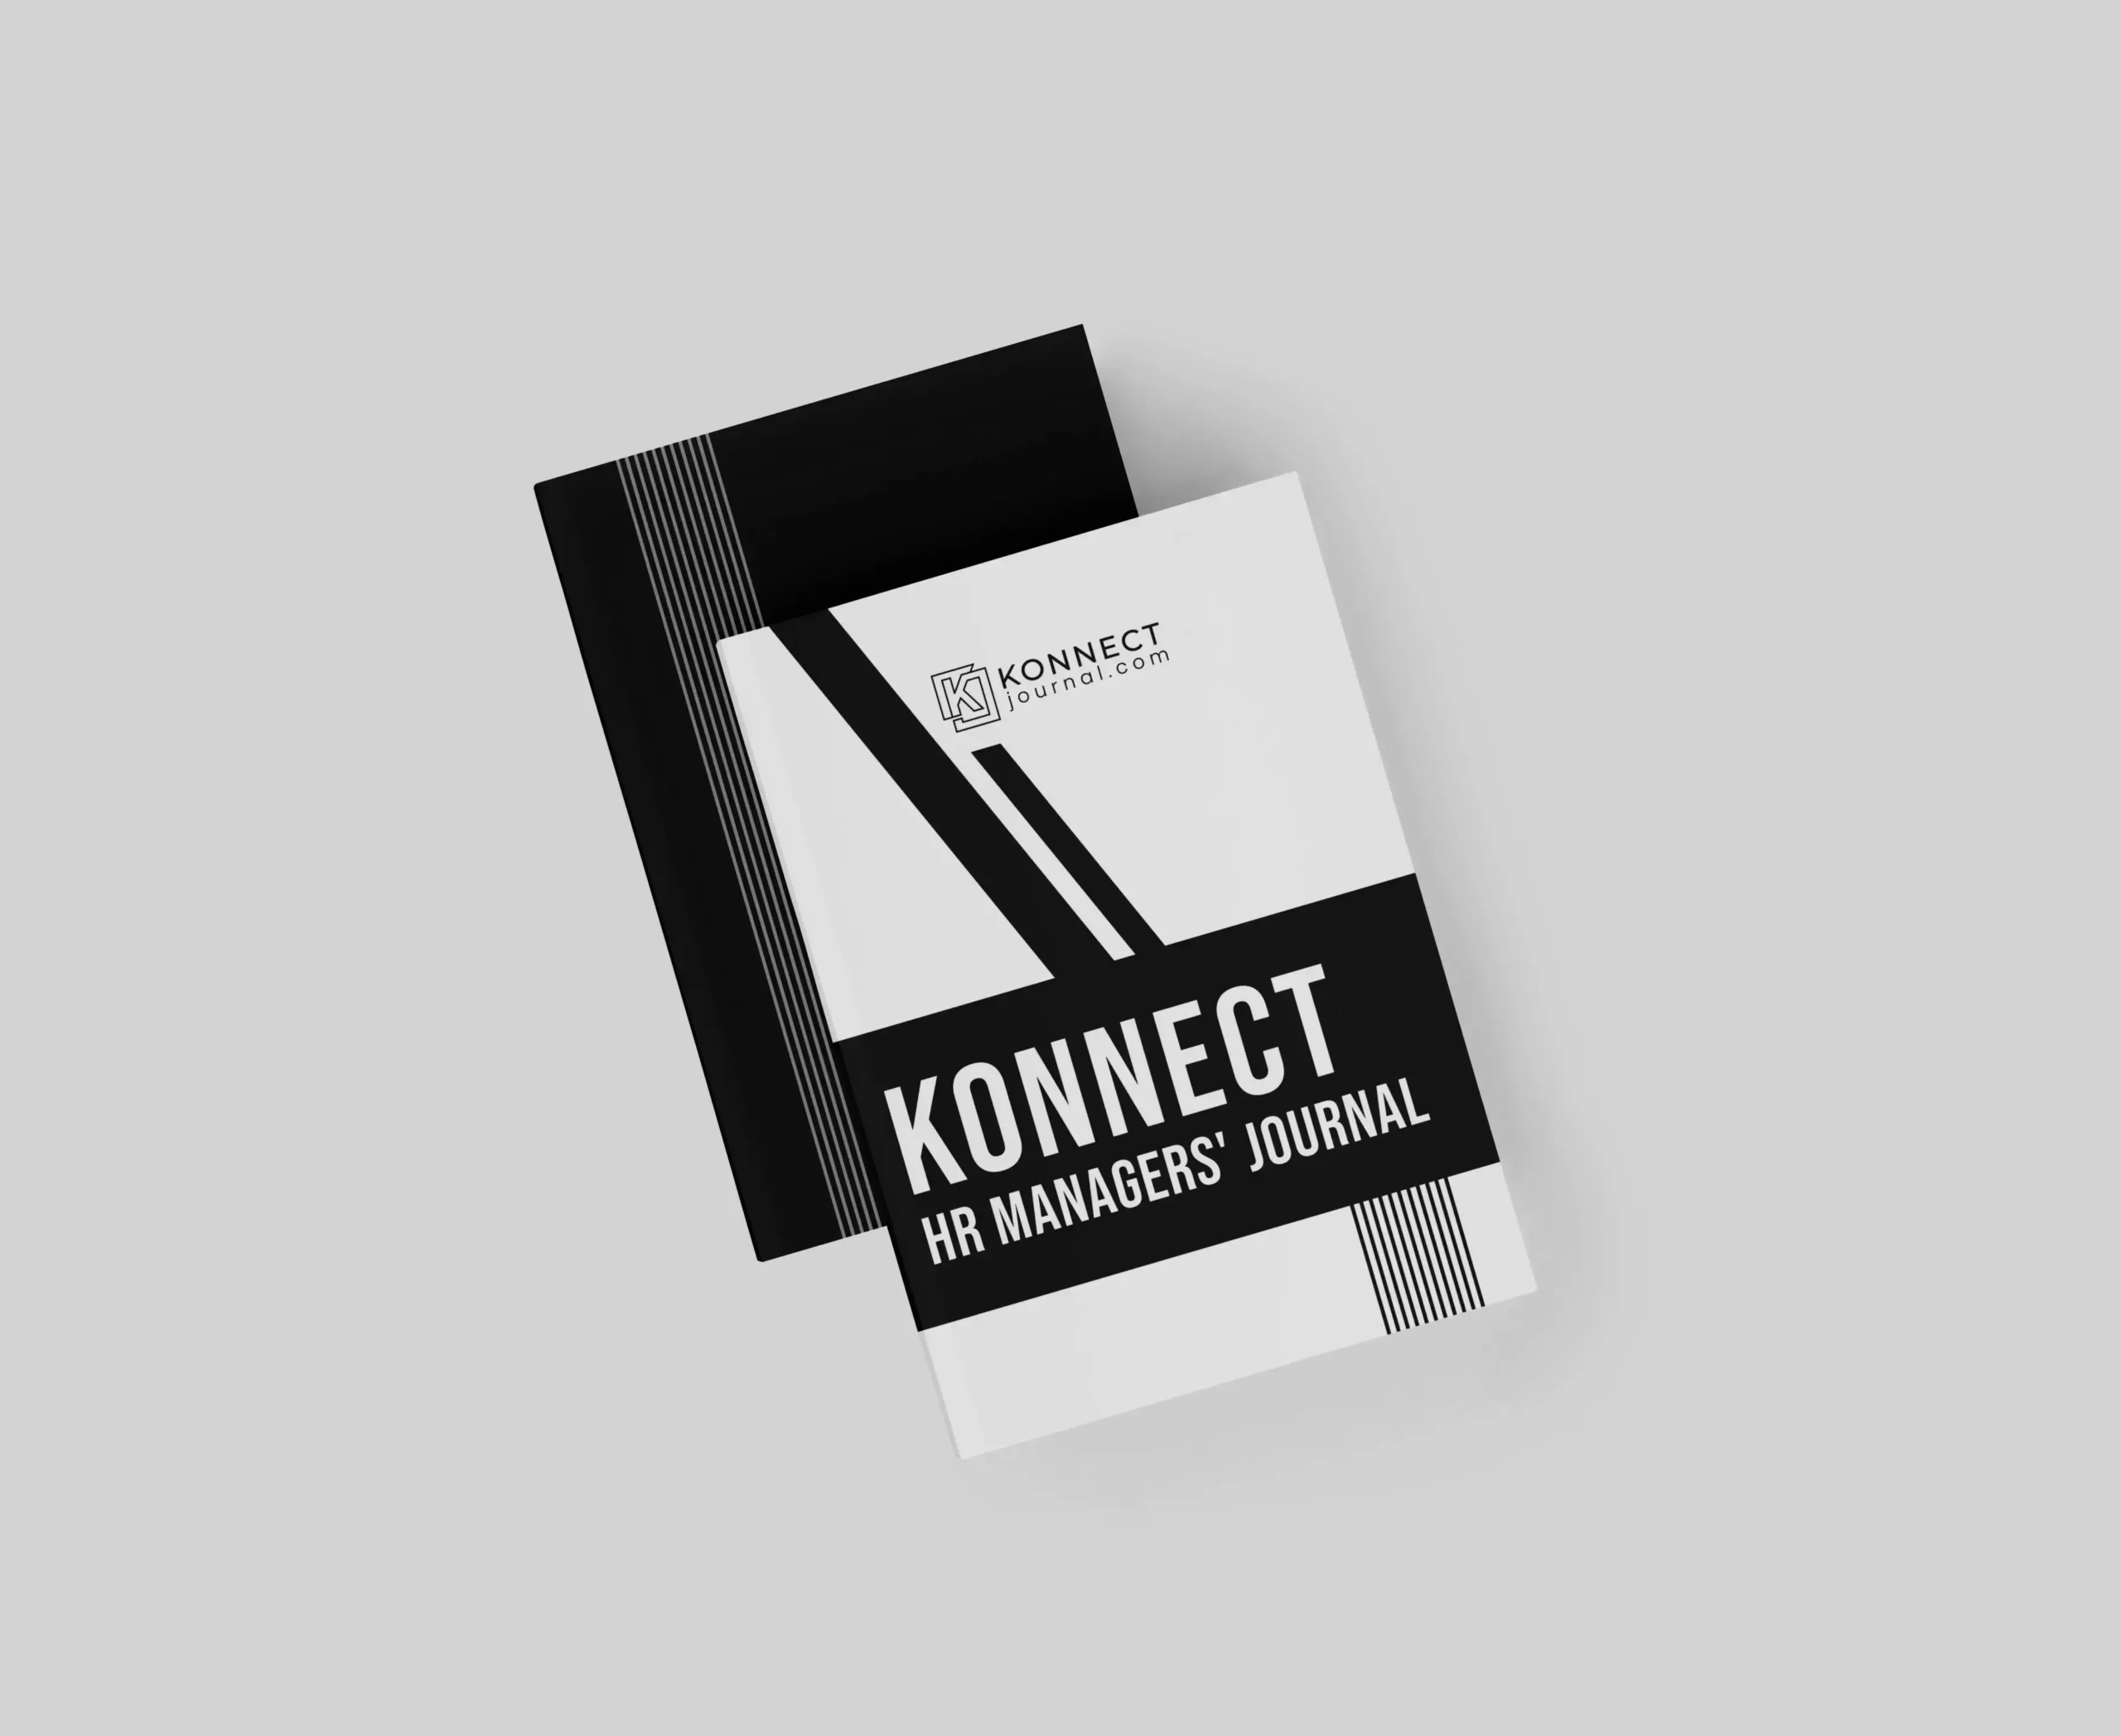 Konnect HR Managers’ Journal